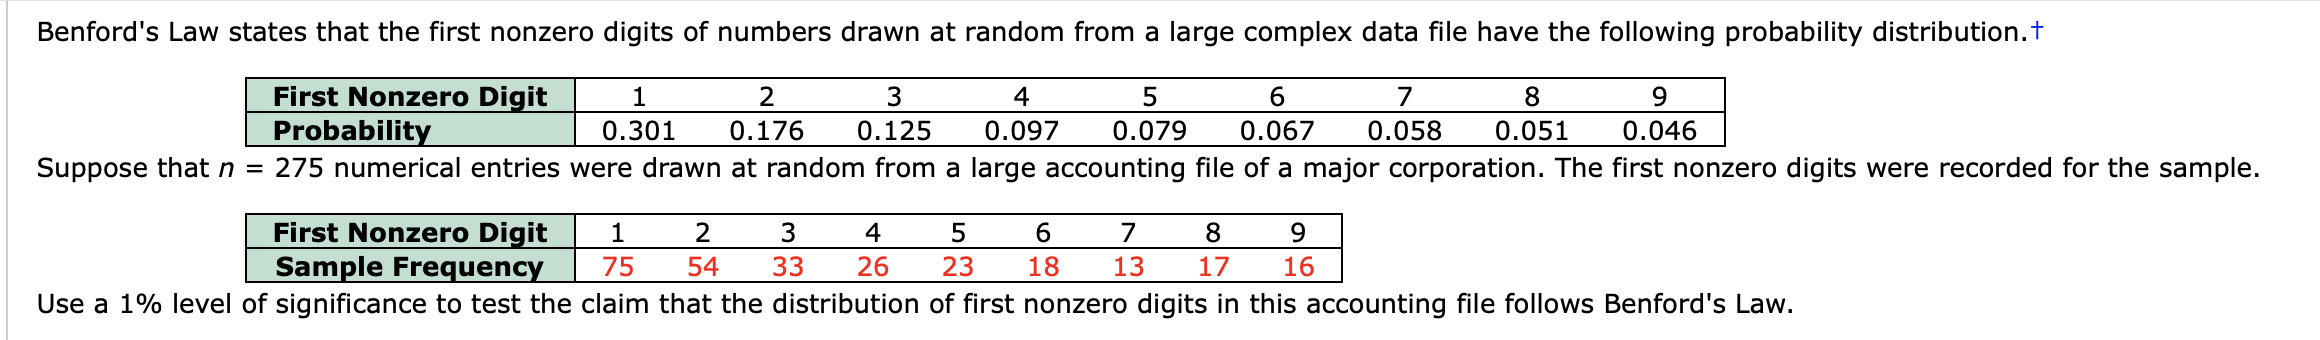 Benford's Law states that the first nonzero digits of numbers drawn at random from a large complex data file have the following probability distribution.t
First Nonzero Digit
Probability
3
4
8
9.
0.301
0.176
0.125
0.097
0.079
0.067
0.058
0.051
0.046
Suppose that n = 275 numerical entries were drawn at random from a large accounting file of a major corporation. The first nonzero digits were recorded for the sample.
First Nonzero Digit
Sample Frequency
2
3
8
9.
75
54
33
26
23
18
13
17
16
Use a 1% level of significance to test the claim that the distribution of first nonzero digits in this accounting file follows Benford's Law.
